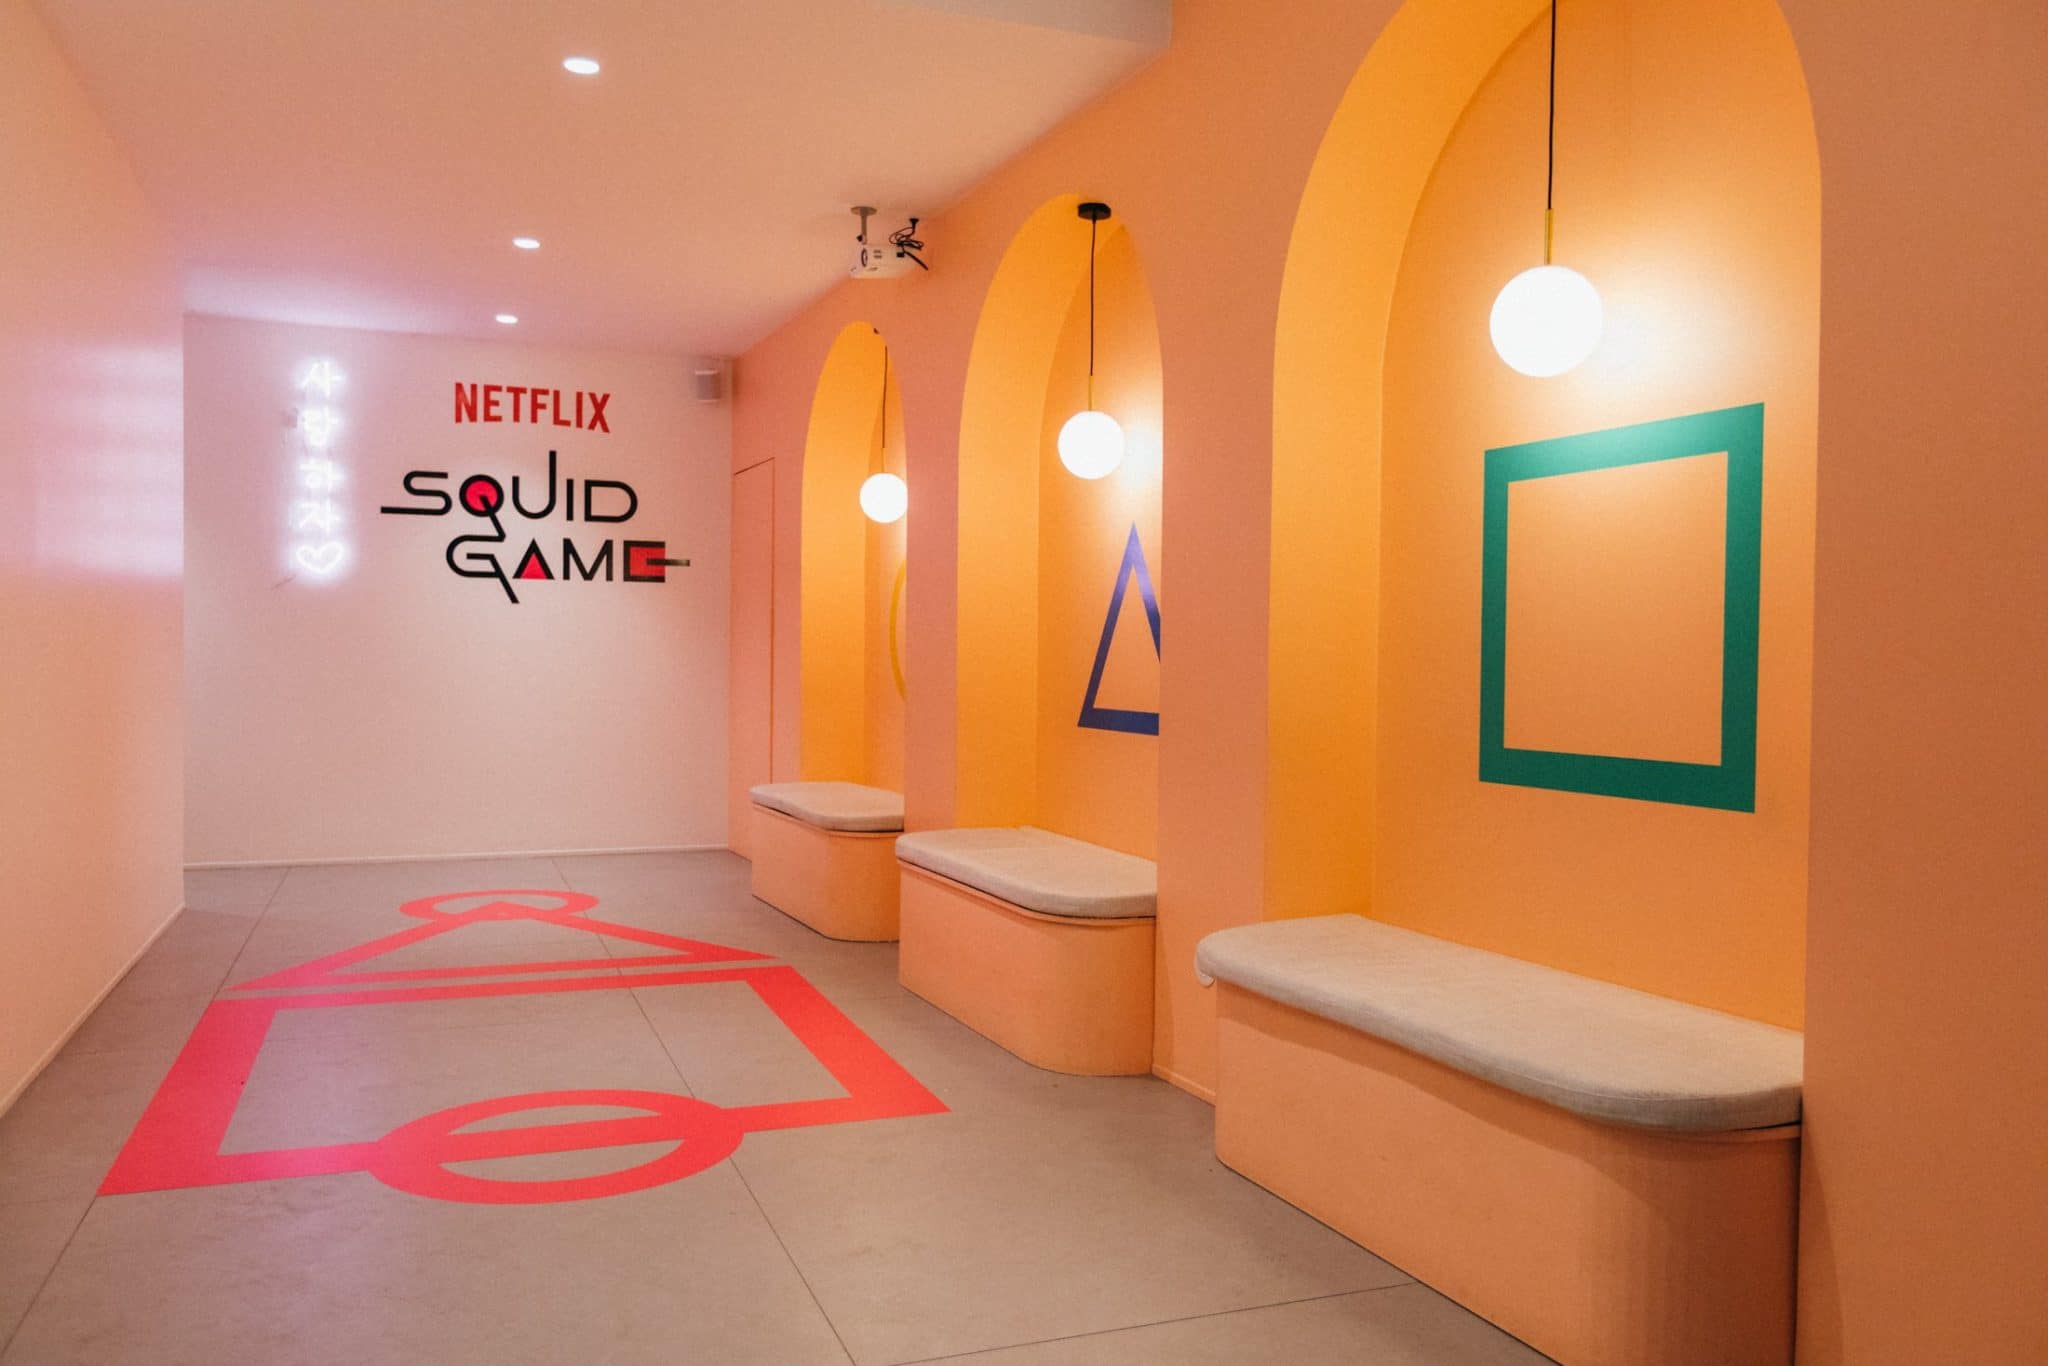 Squid Game' in real life? The IRL competition comes to L.A. - Los